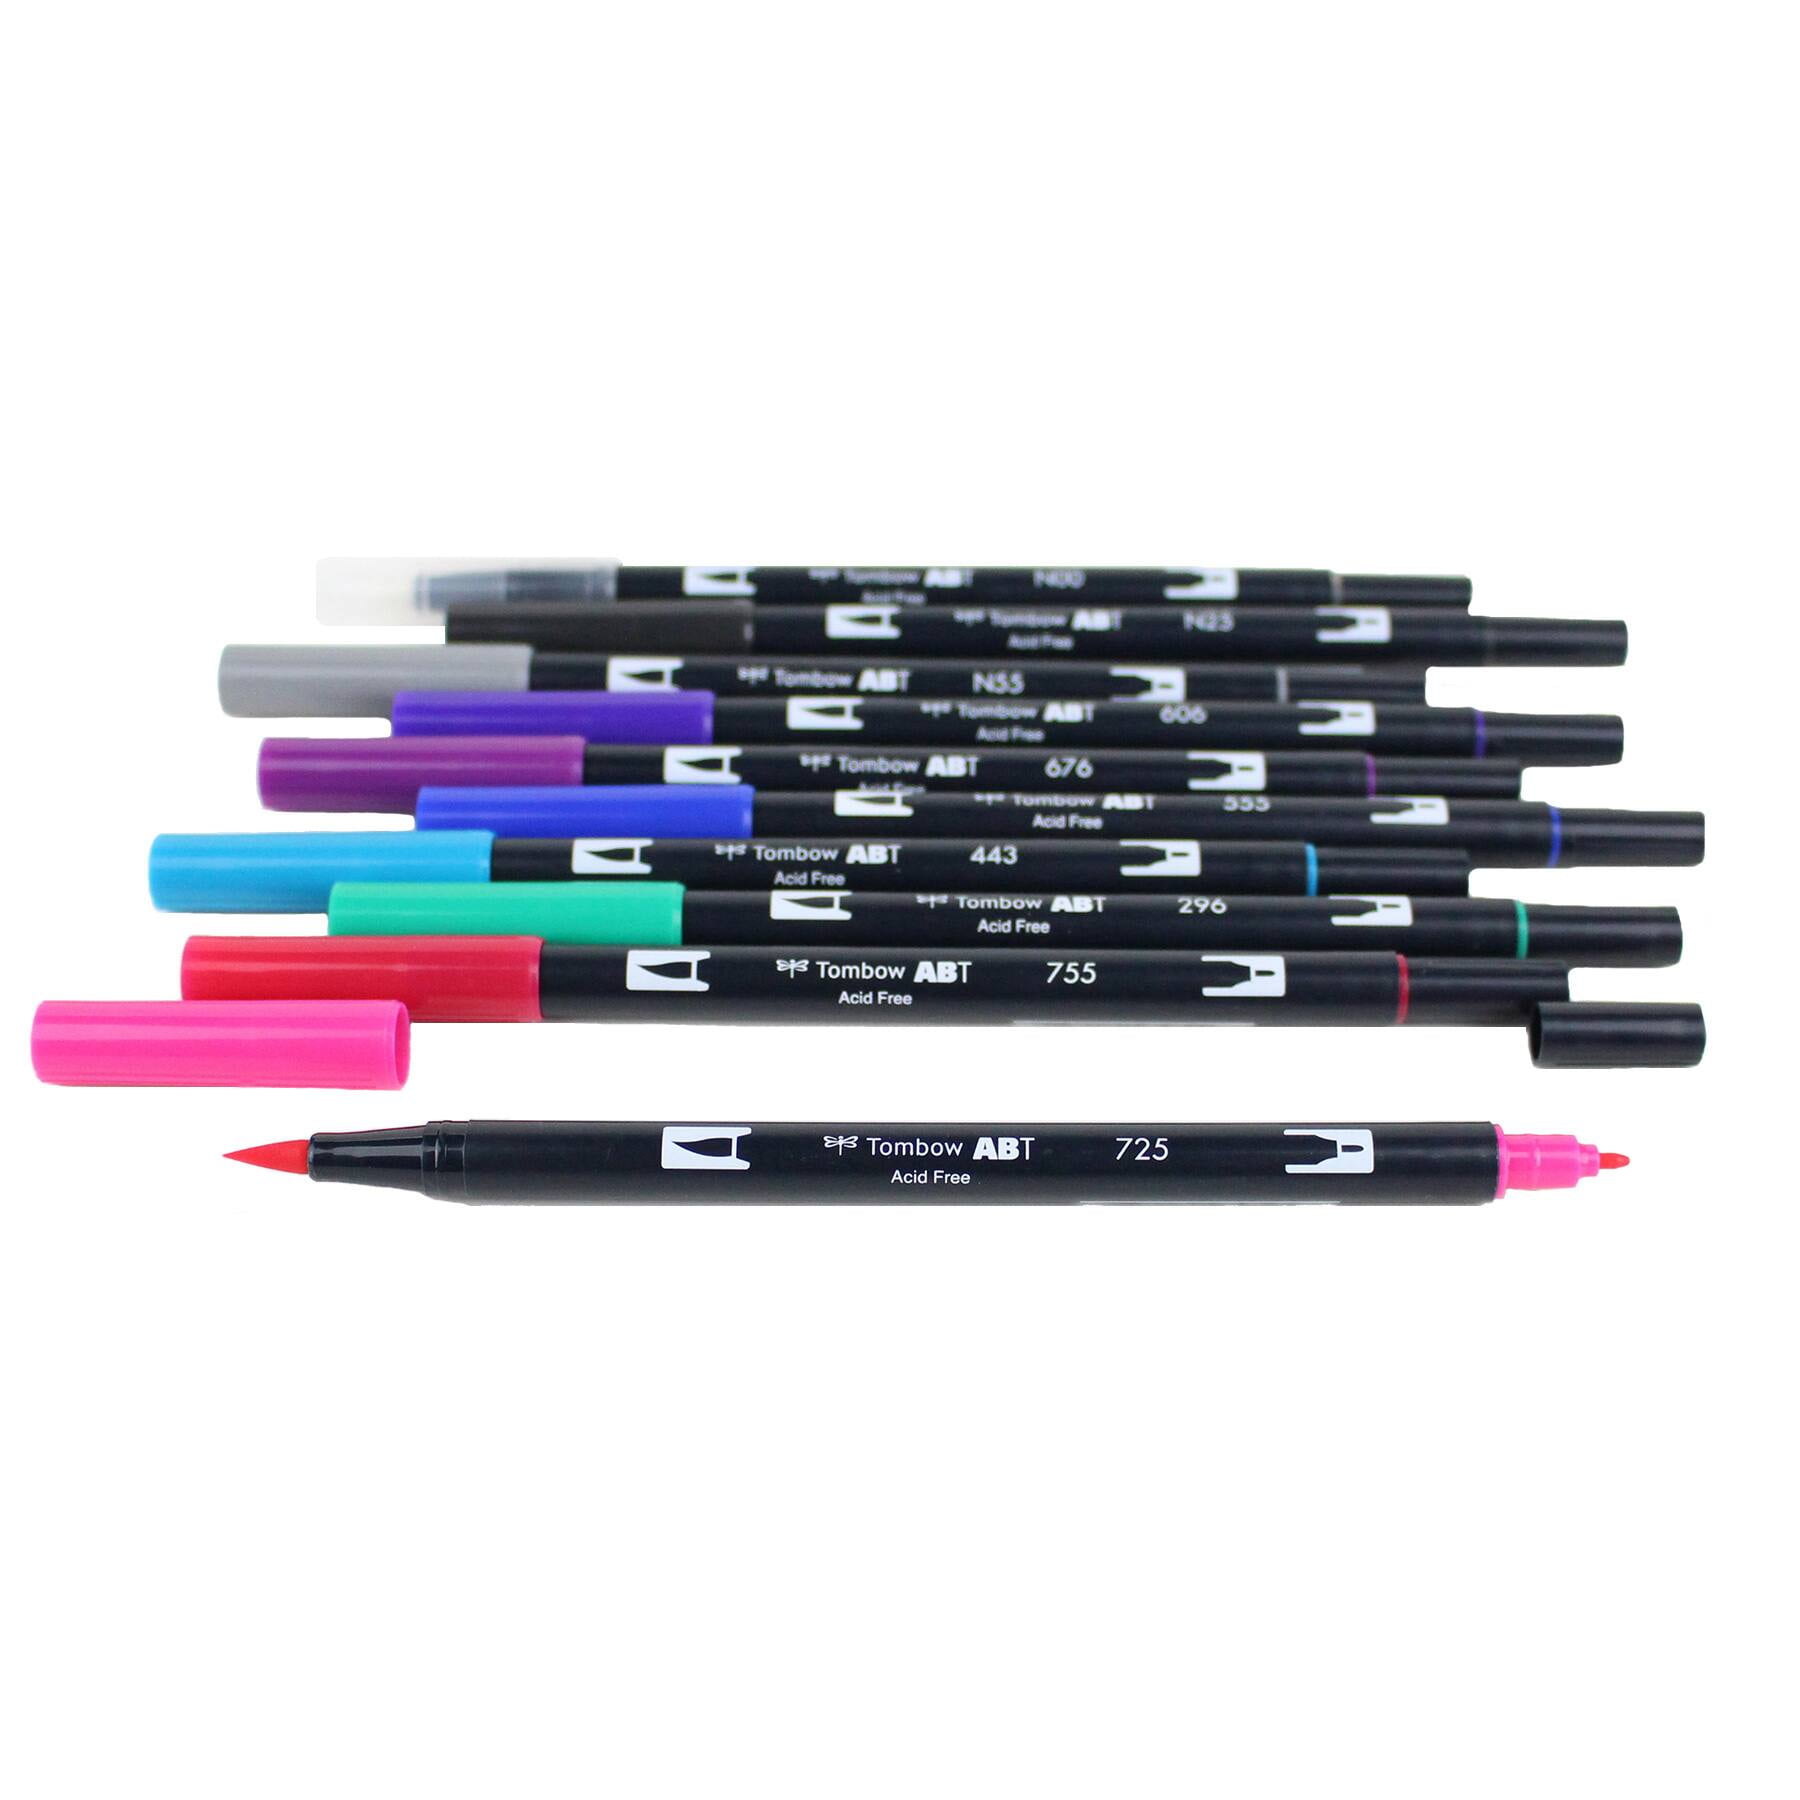 Tombow Dual Brush Pen Sets of 108, 20 & 10 - Brush & Fine Tip Markers